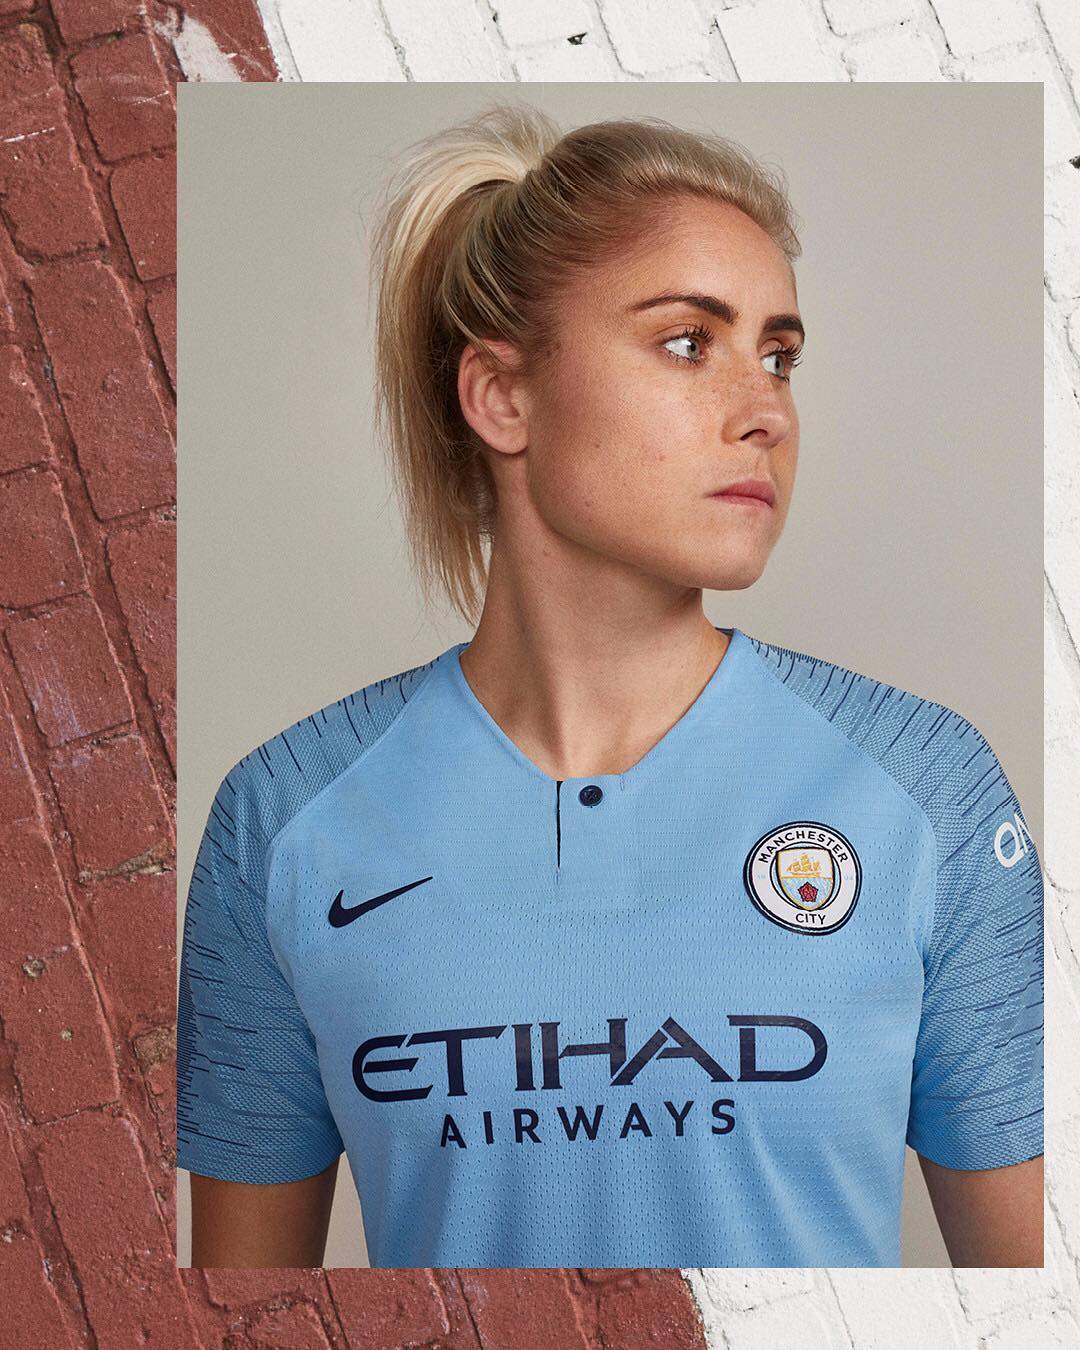 51 Hot Pictures Of Steph Houghton Will Heat Up Your Blood With Fire And Energy For This Sexy Diva 32